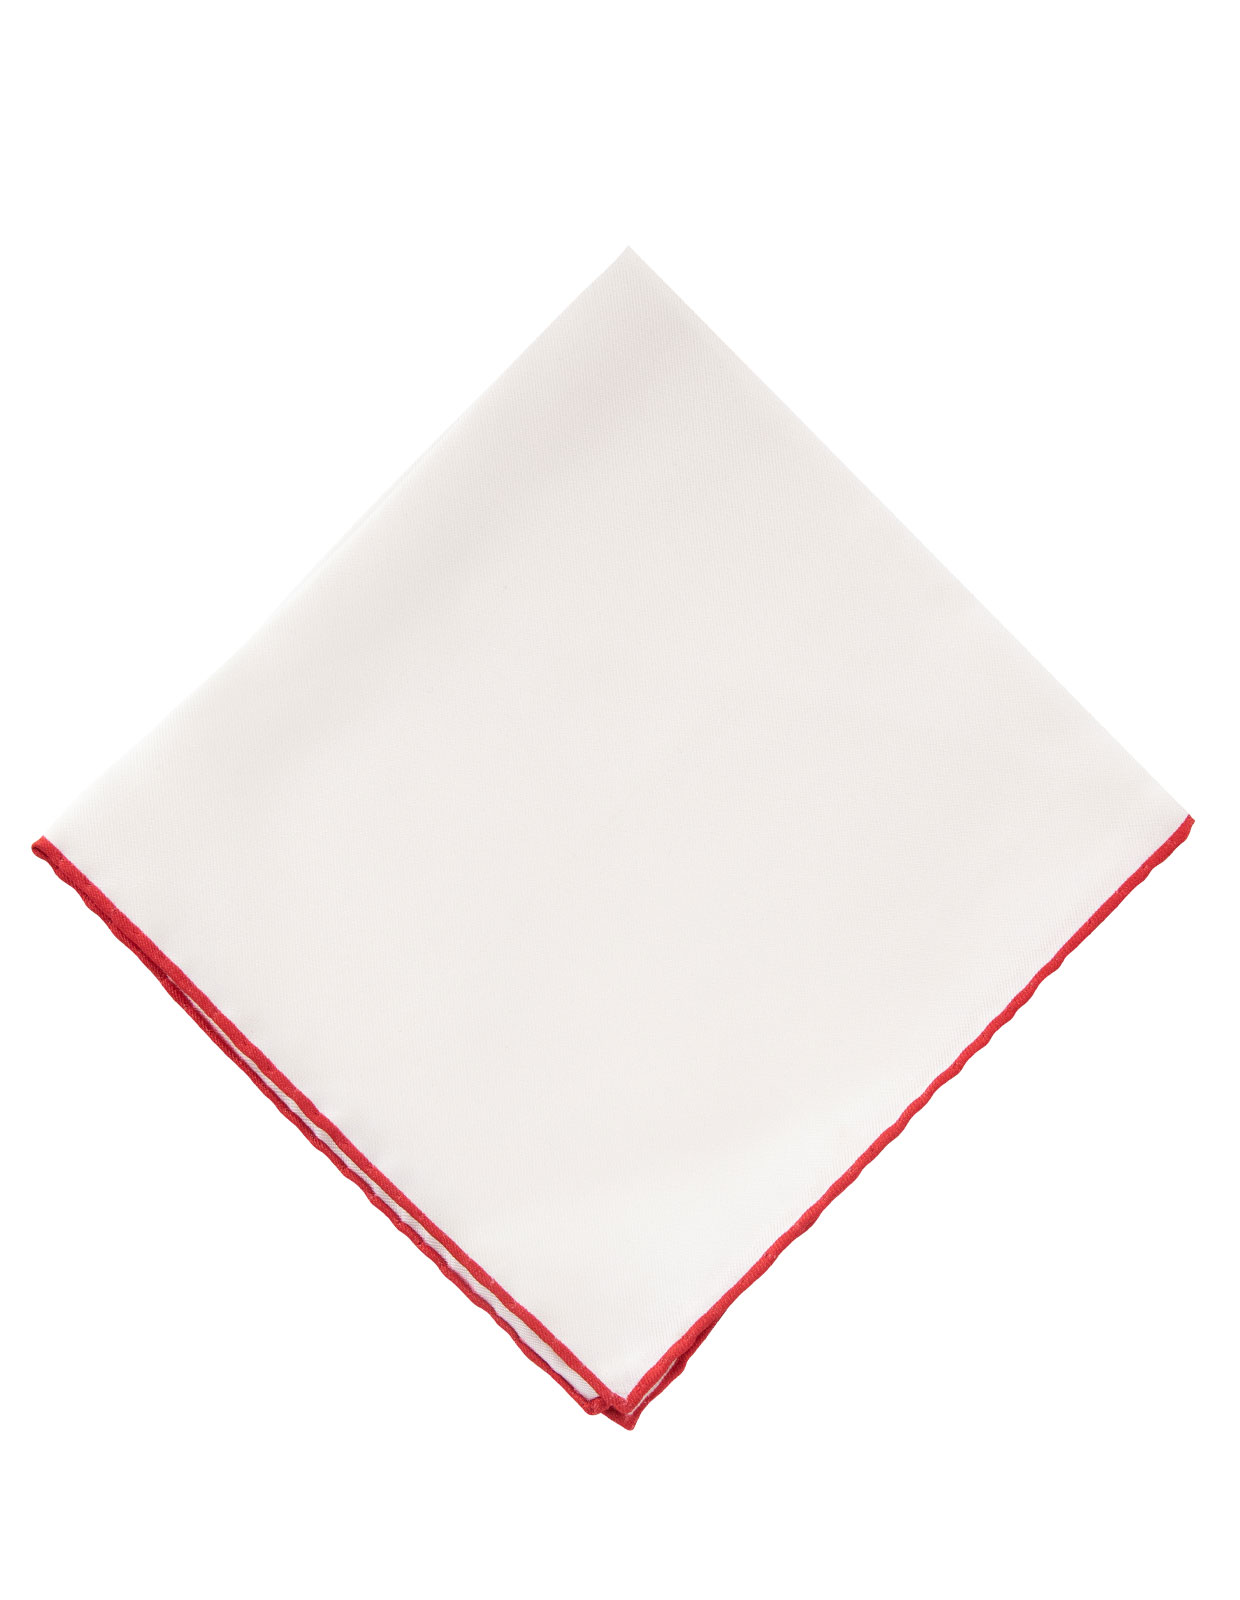 Pocket Square Silk Colored Edging White/Red